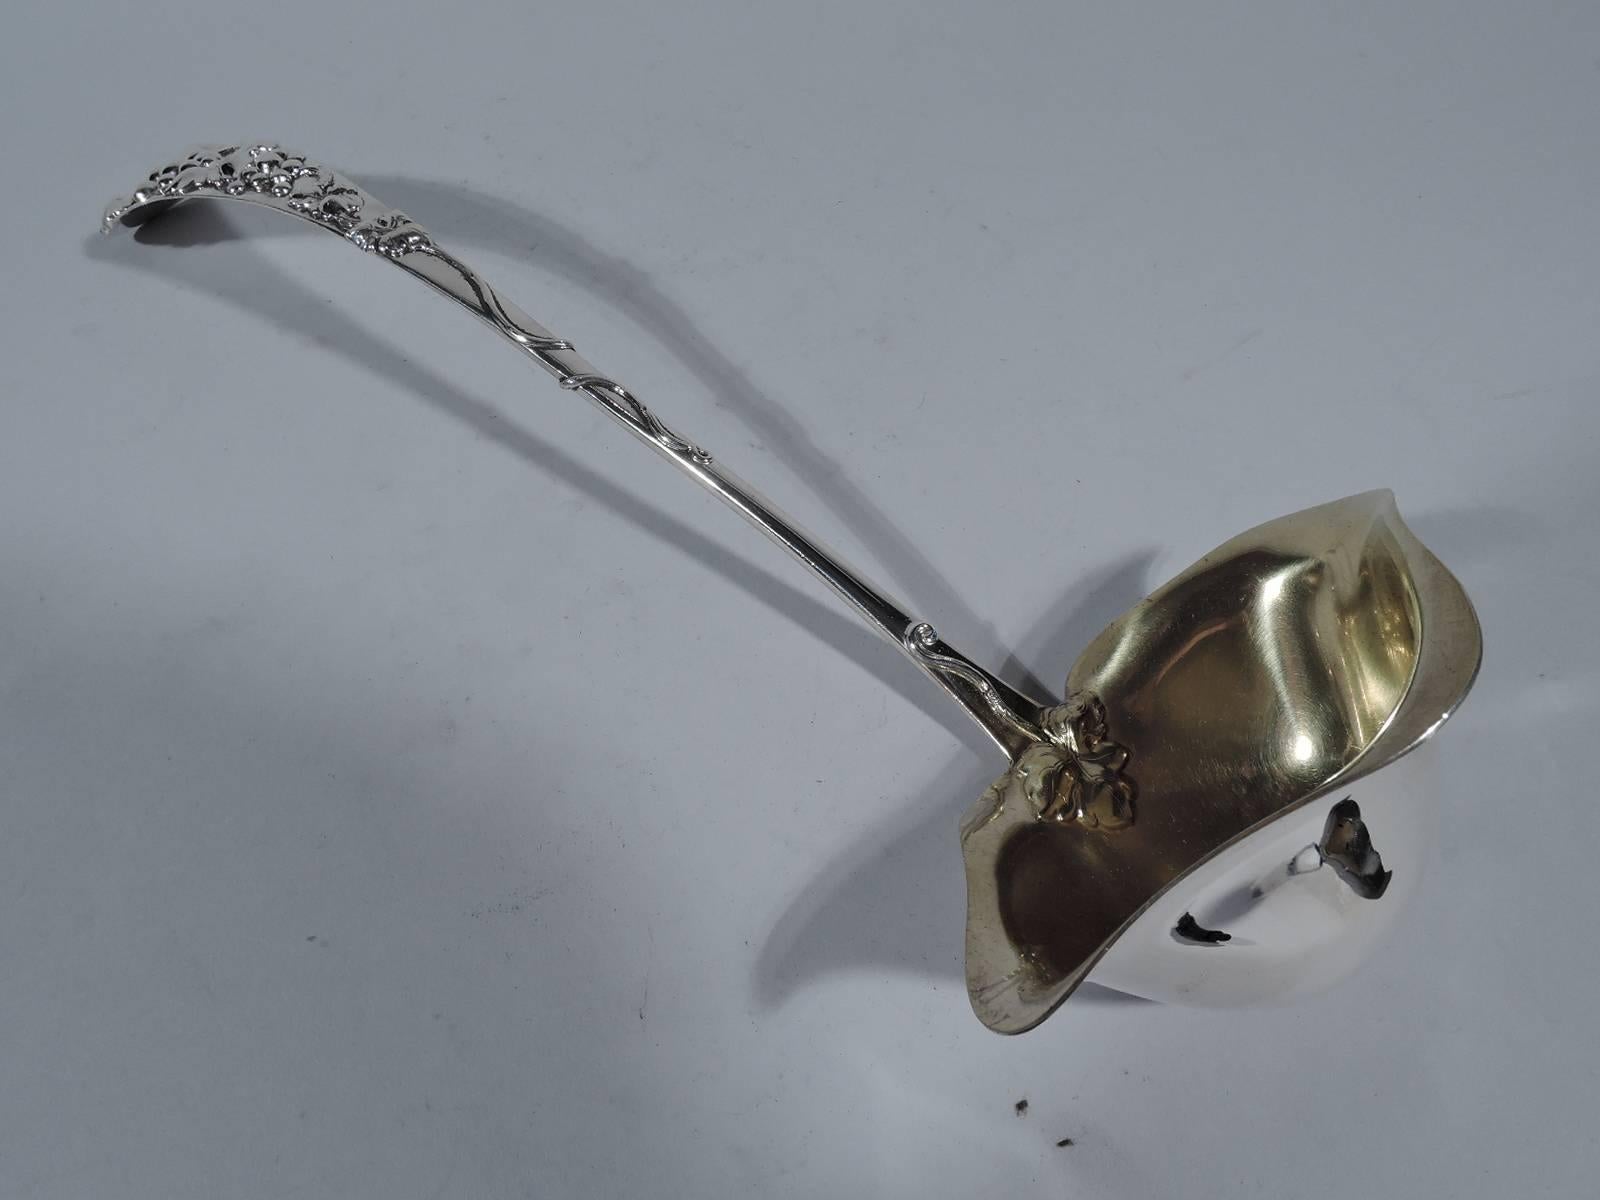 Sterling silver punch ladle. Made by Frank Smith in Gardner, Mass., circa 1900. Tapering handle with applied fruiting grapevine. Bowl has light gilt wash and front and side spouts. A great piece for festive grape-based concoctions. Hallmarked. Nice